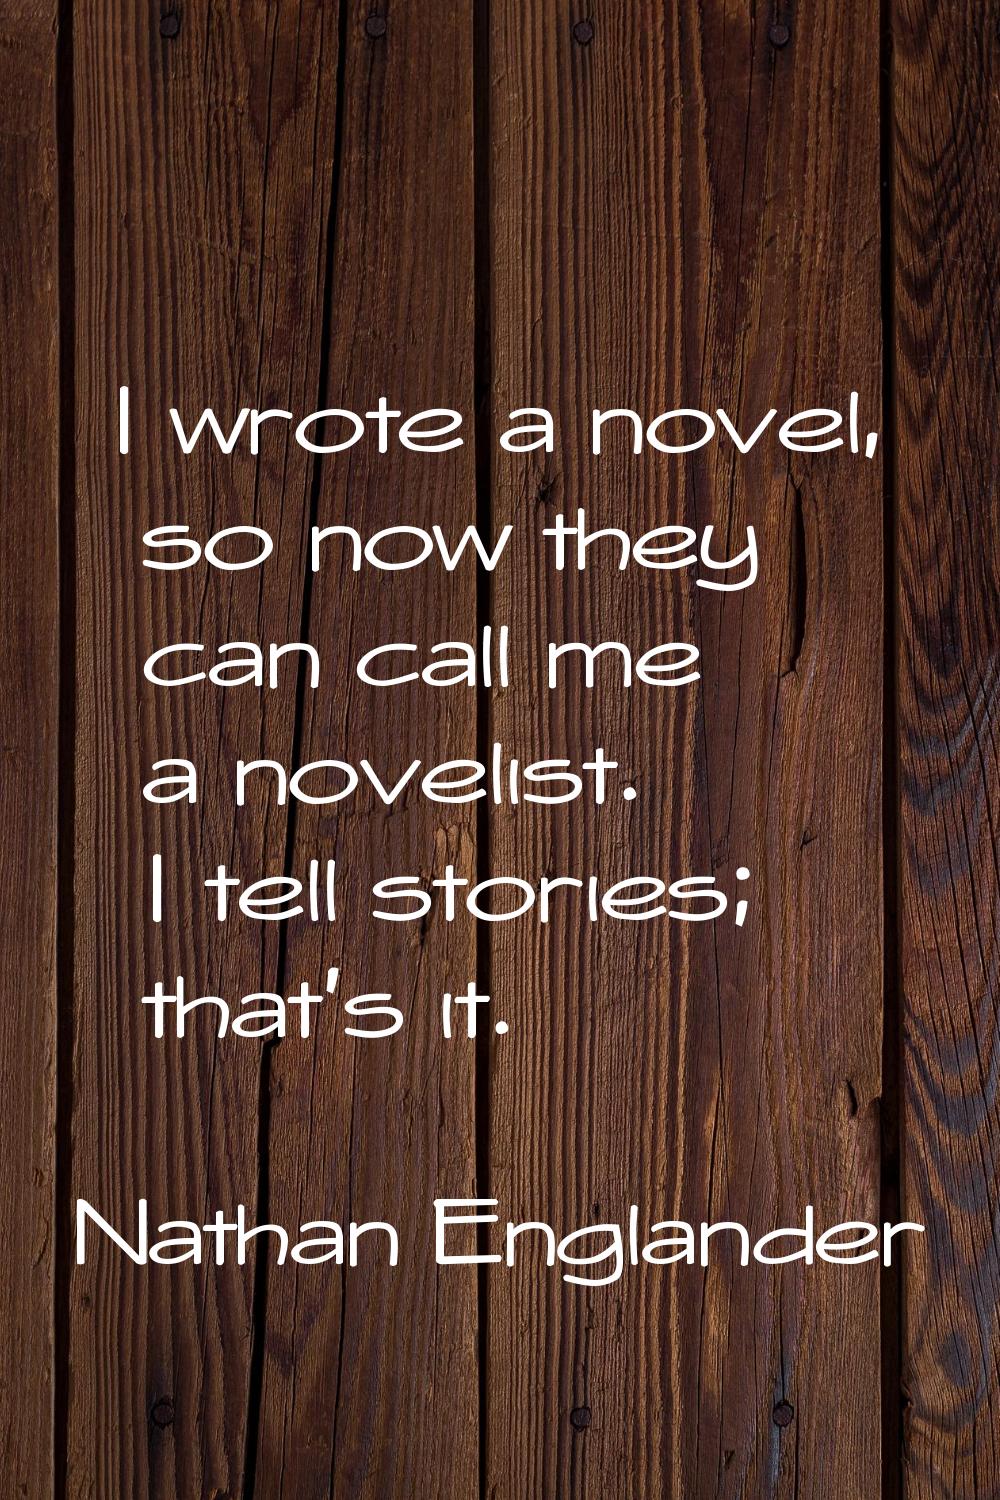 I wrote a novel, so now they can call me a novelist. I tell stories; that's it.